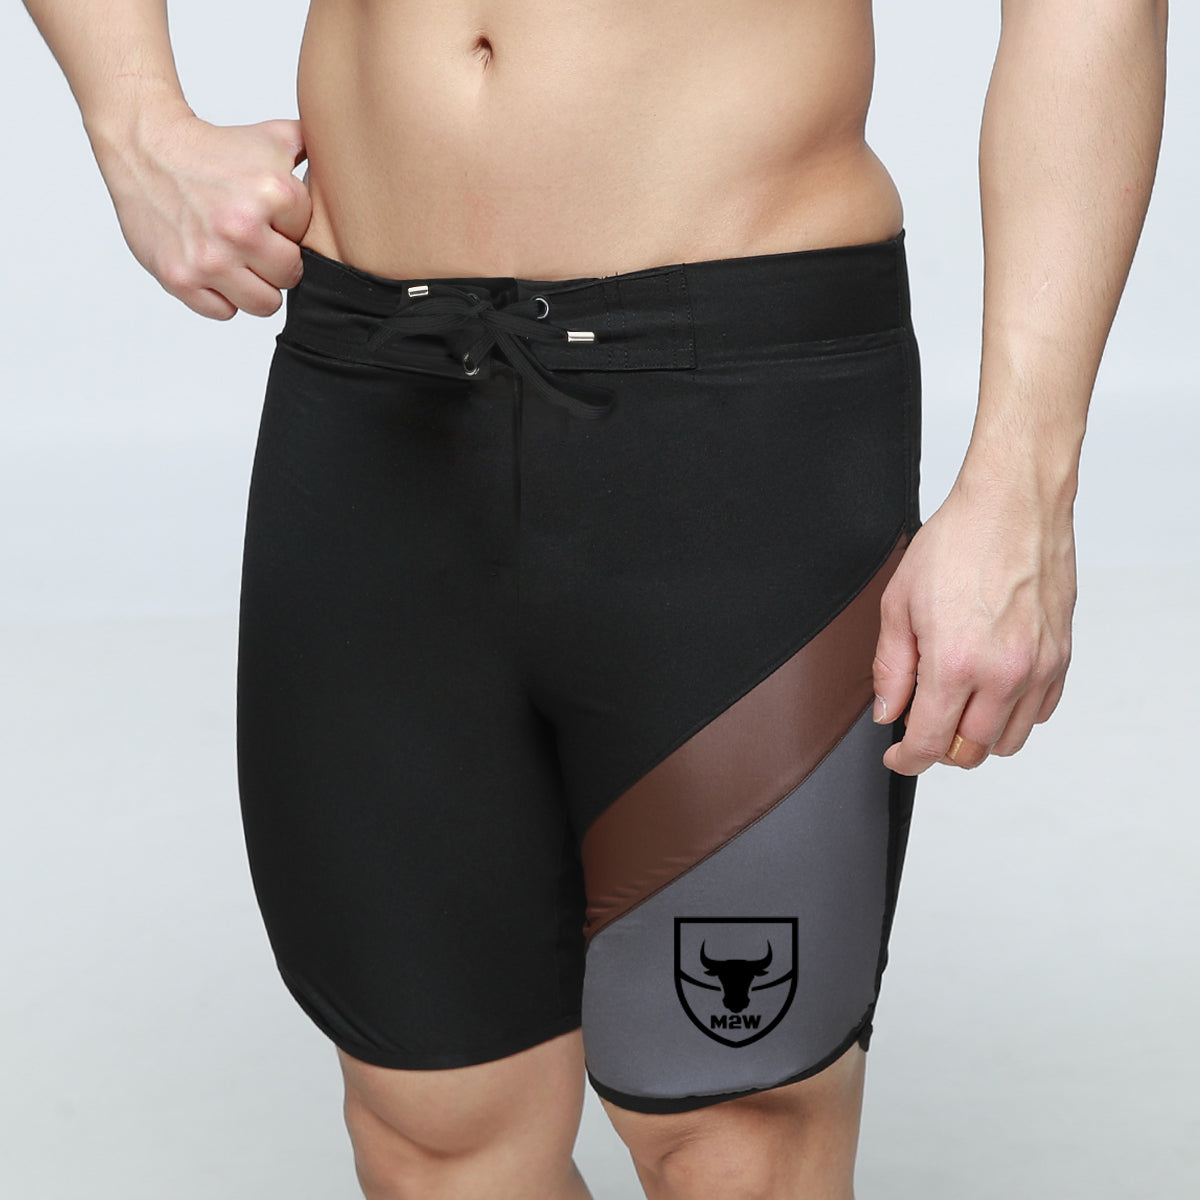 [MetroMuscleWear] Cafe Physique Board Short (4716-19)